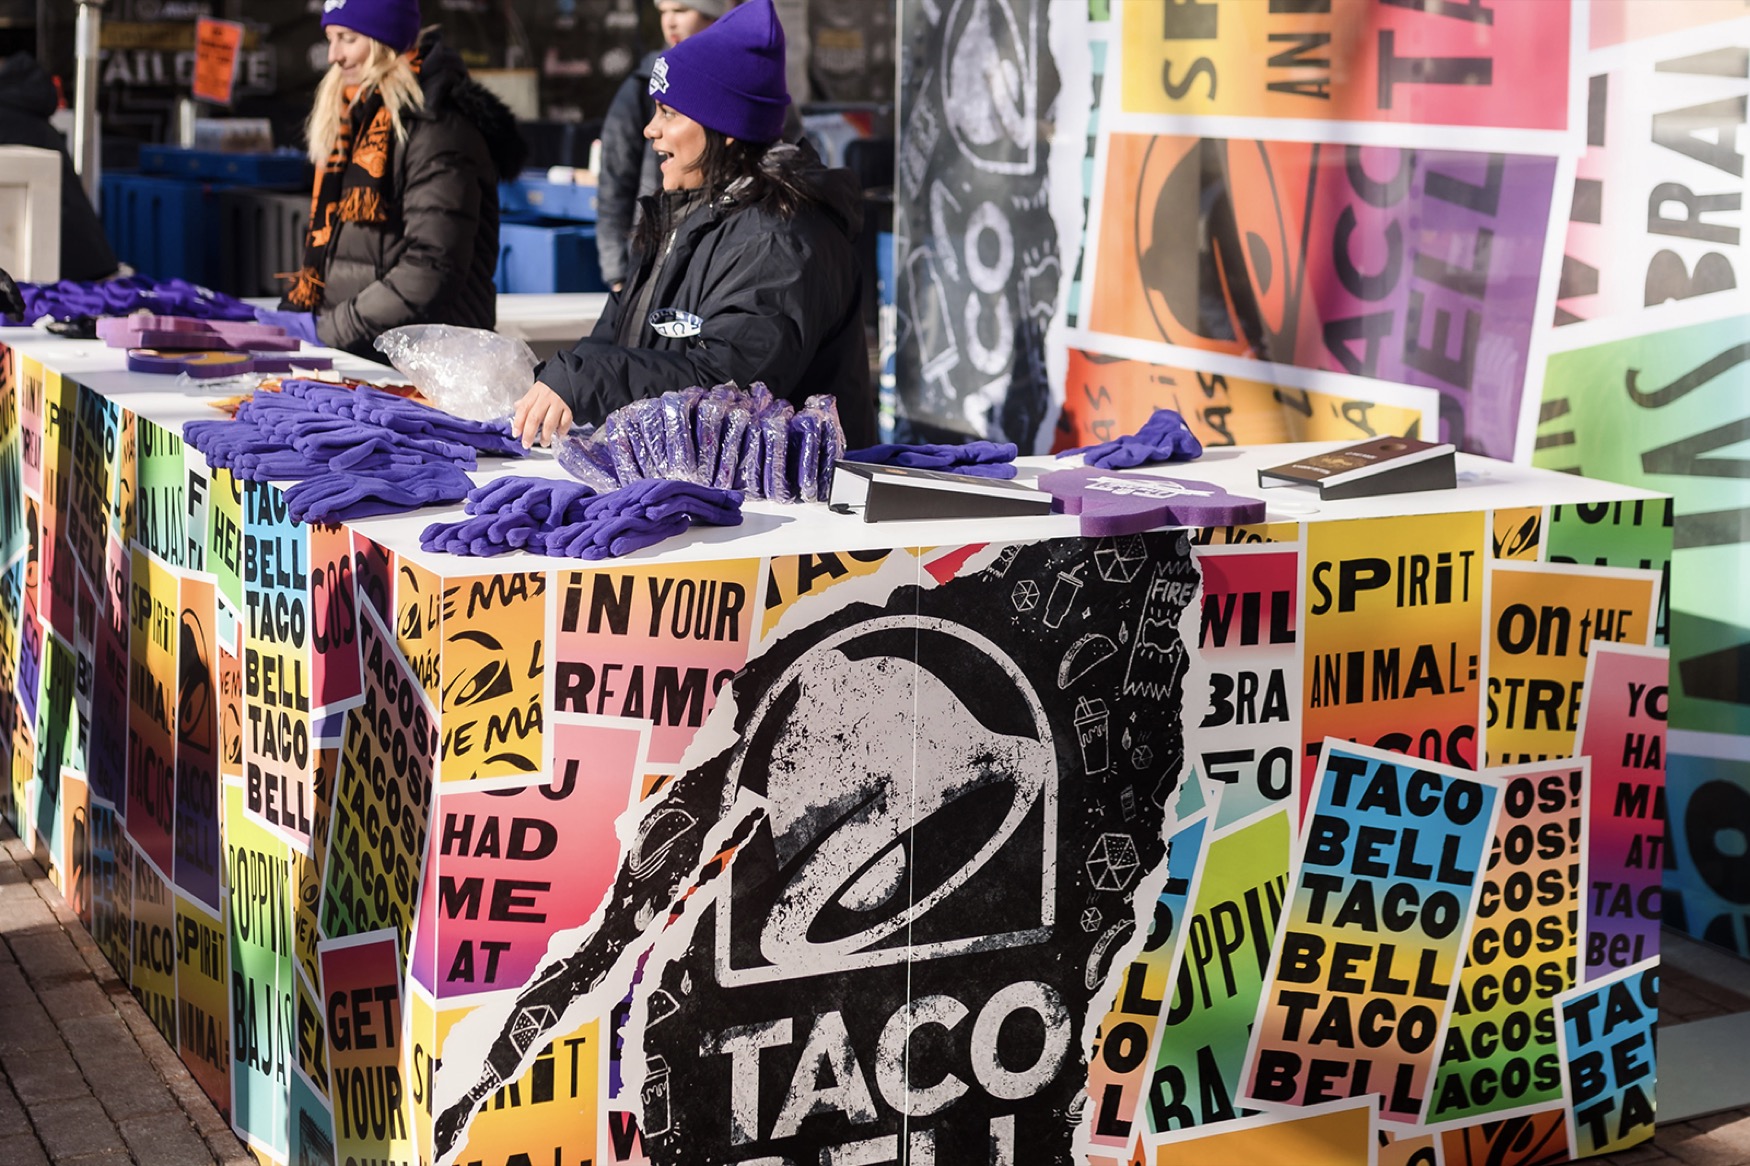 Taco Bell marketing booth with purple gloves on its countertop